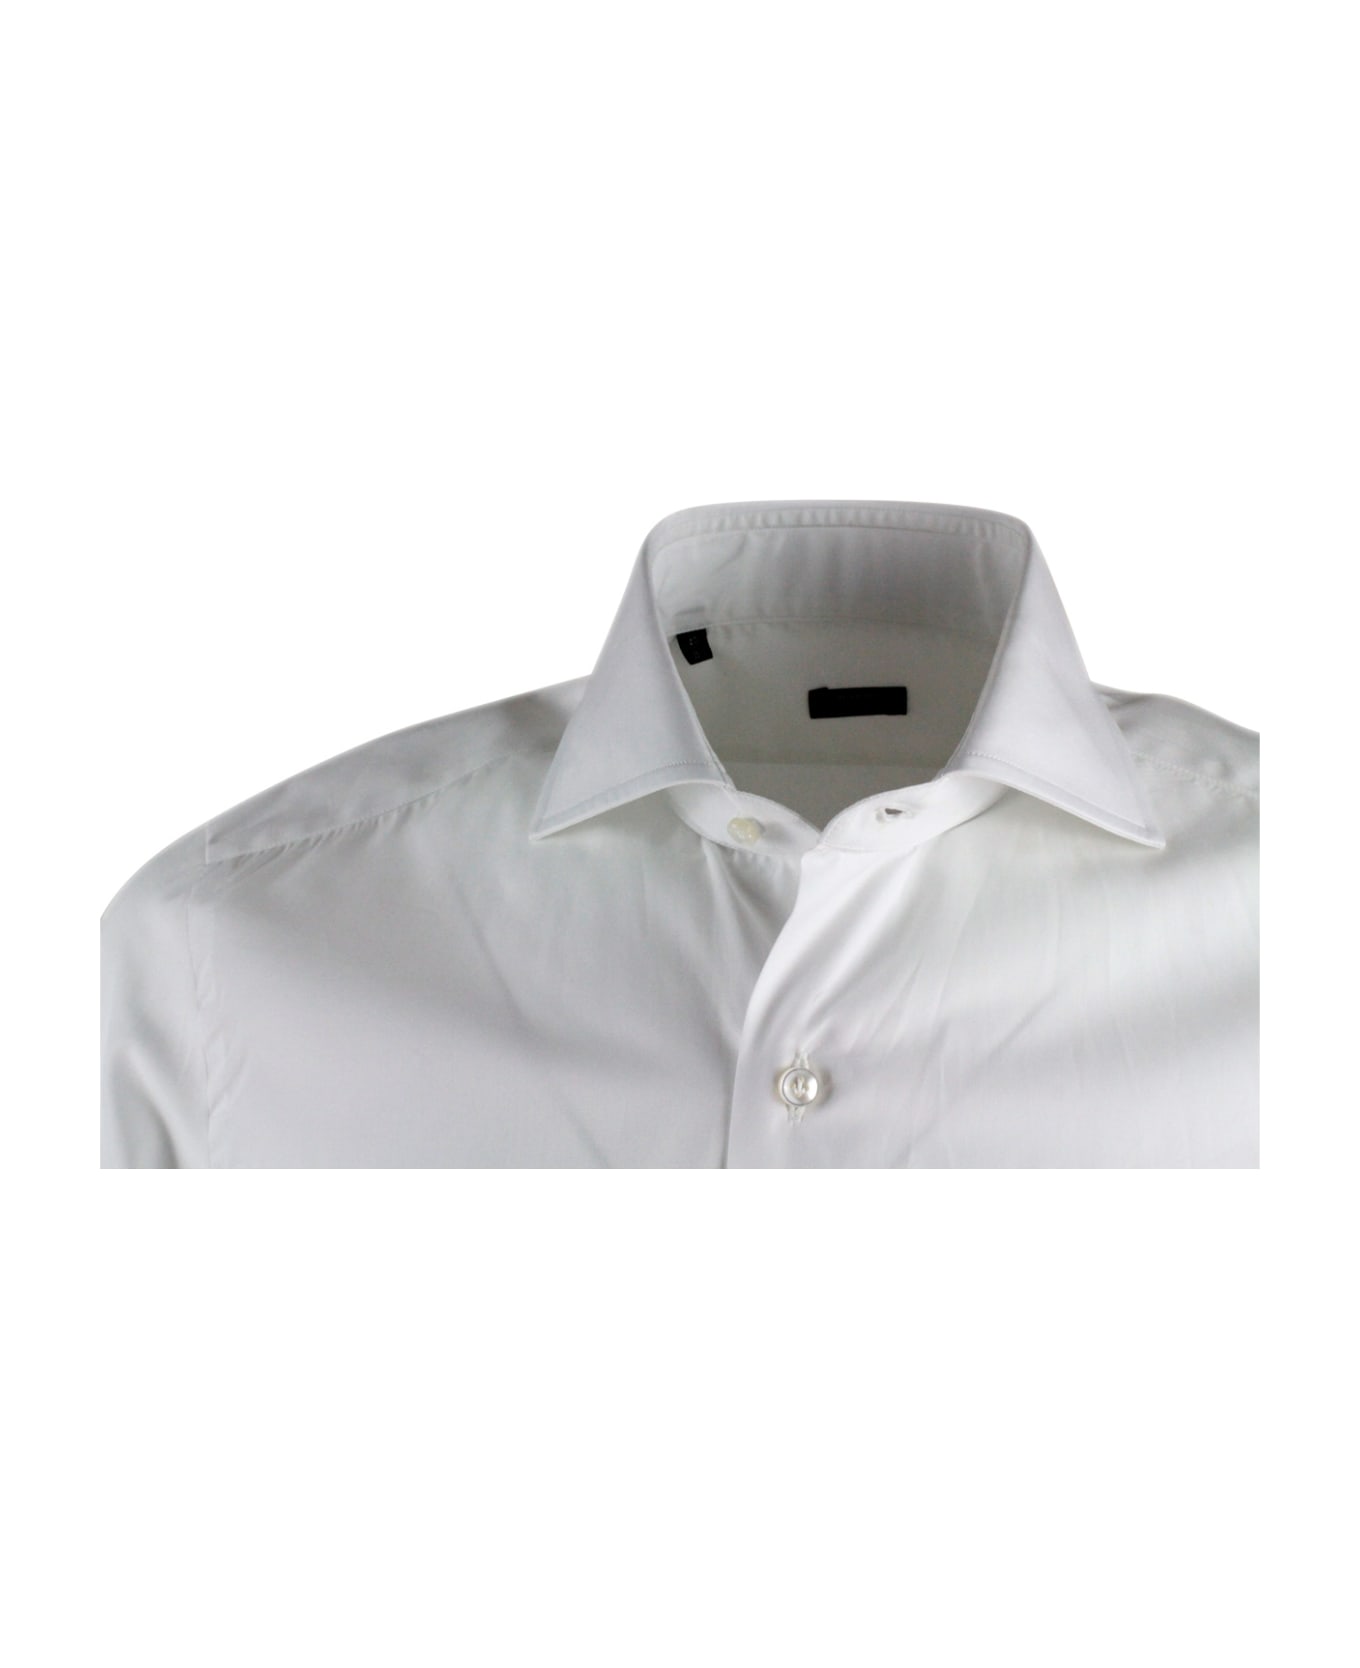 Barba Napoli Slim Fit Shirt In Fine Stretch Cotton, Italian Collar, Hand-stitched Black Label And Mother-of-pearl Buttons - White